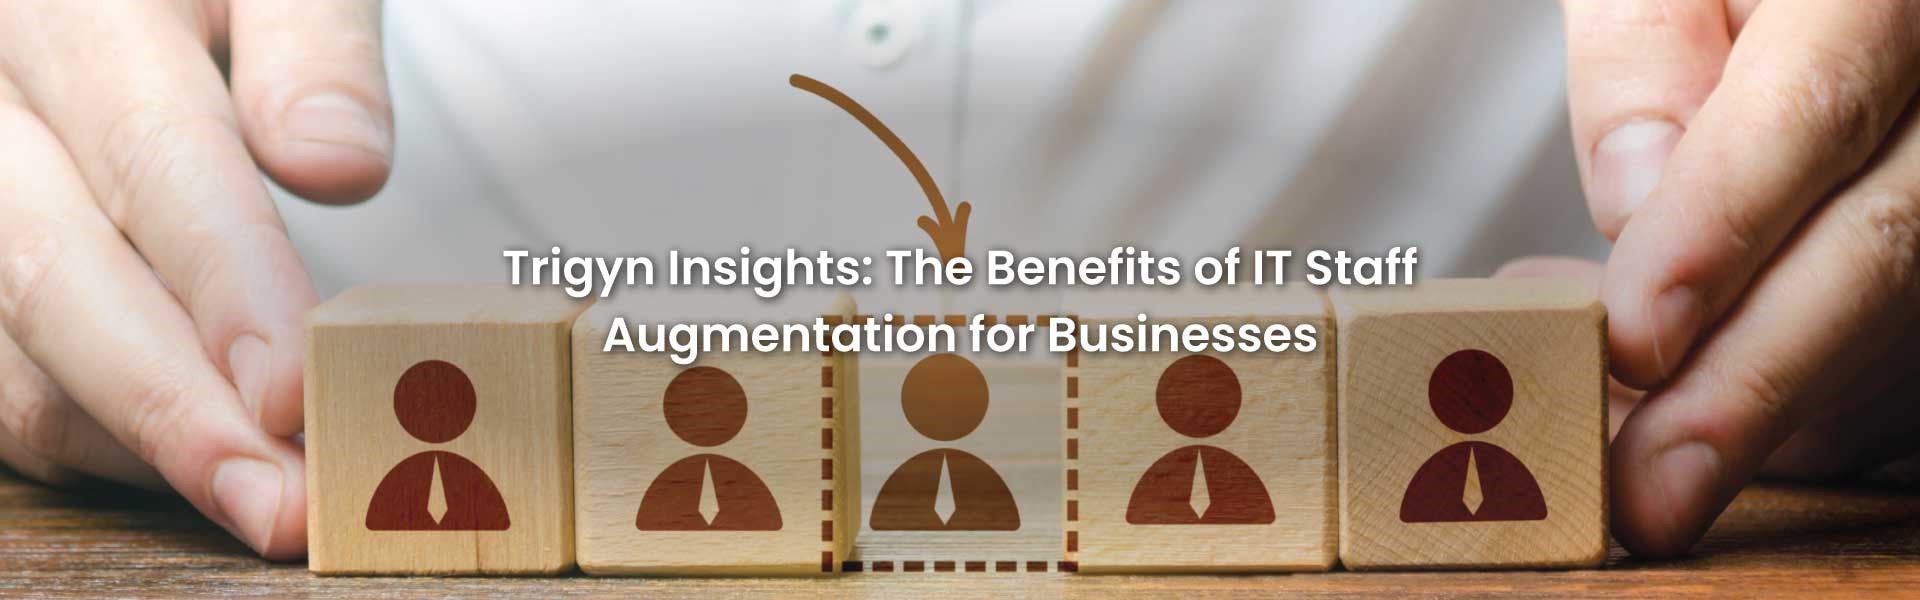  IT Staff Augmentation for Businesses